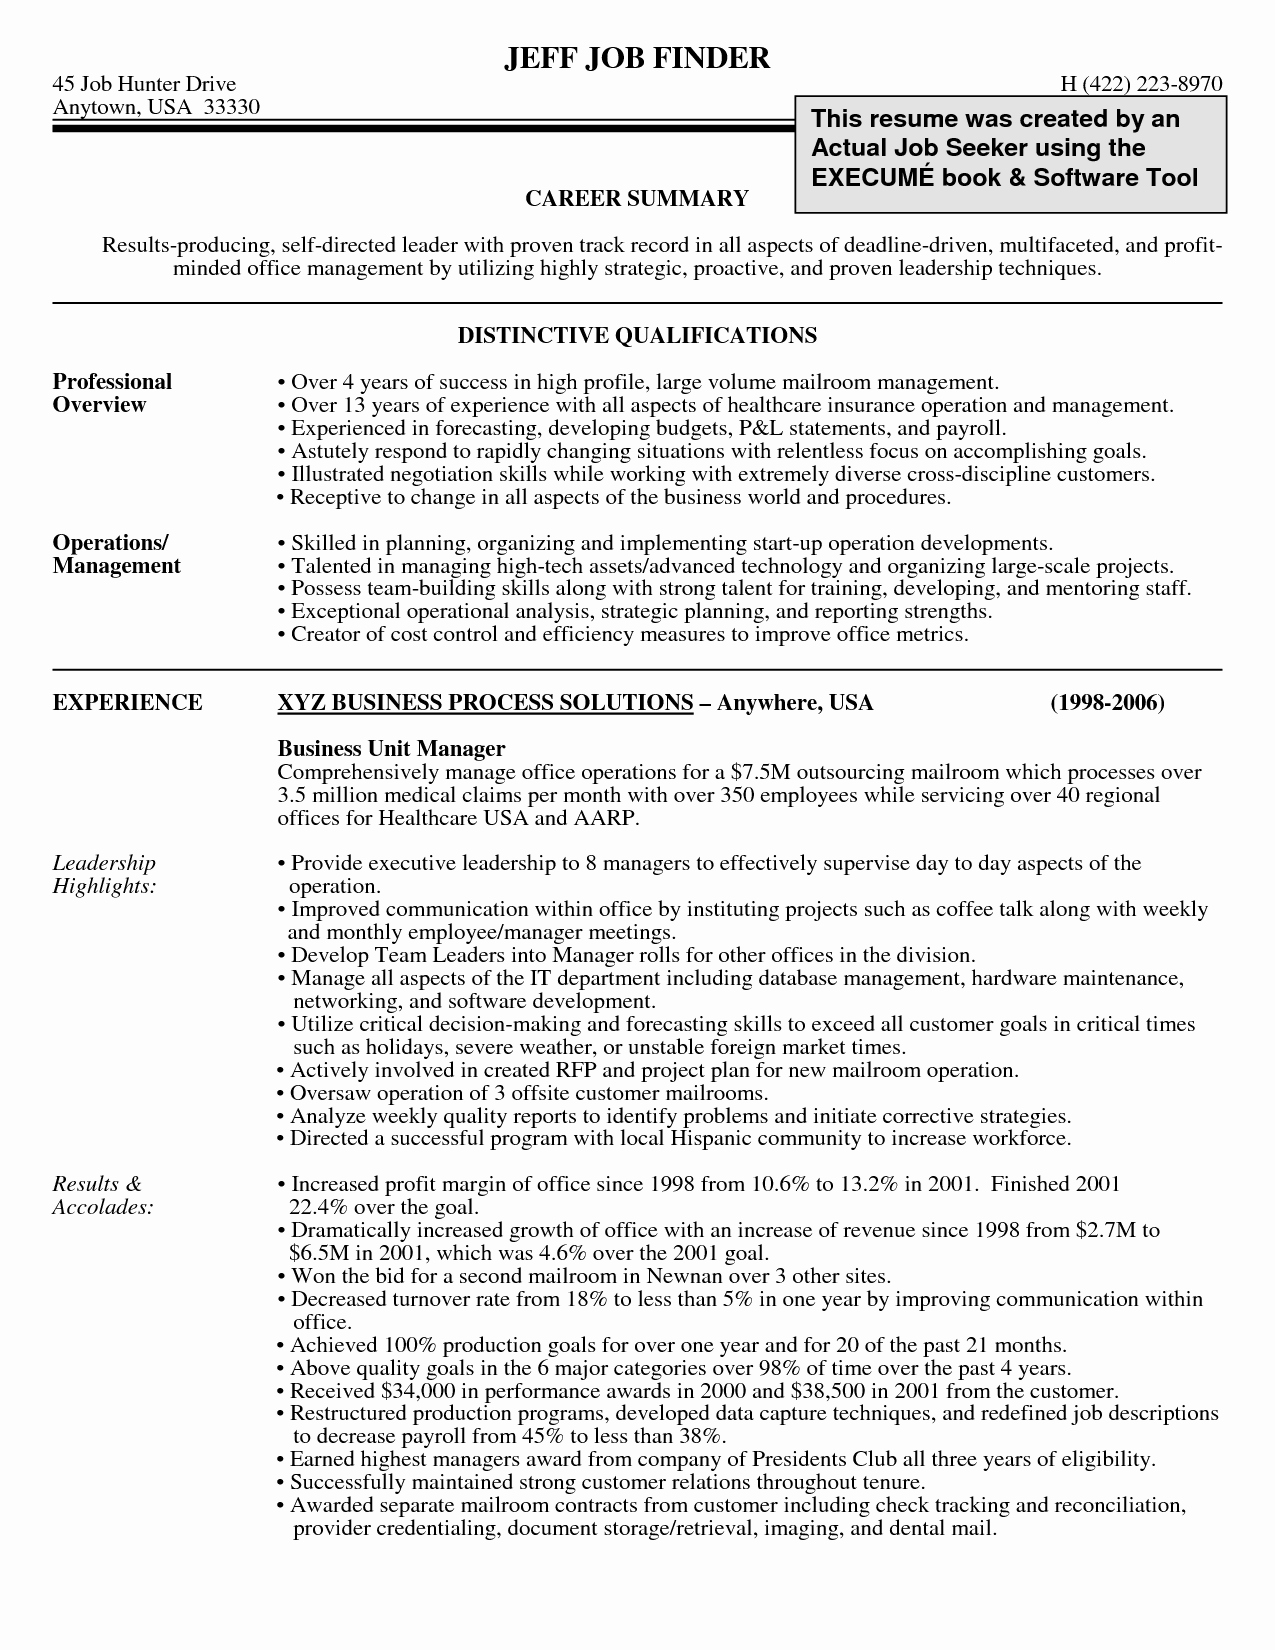 examples of professional summary for resume